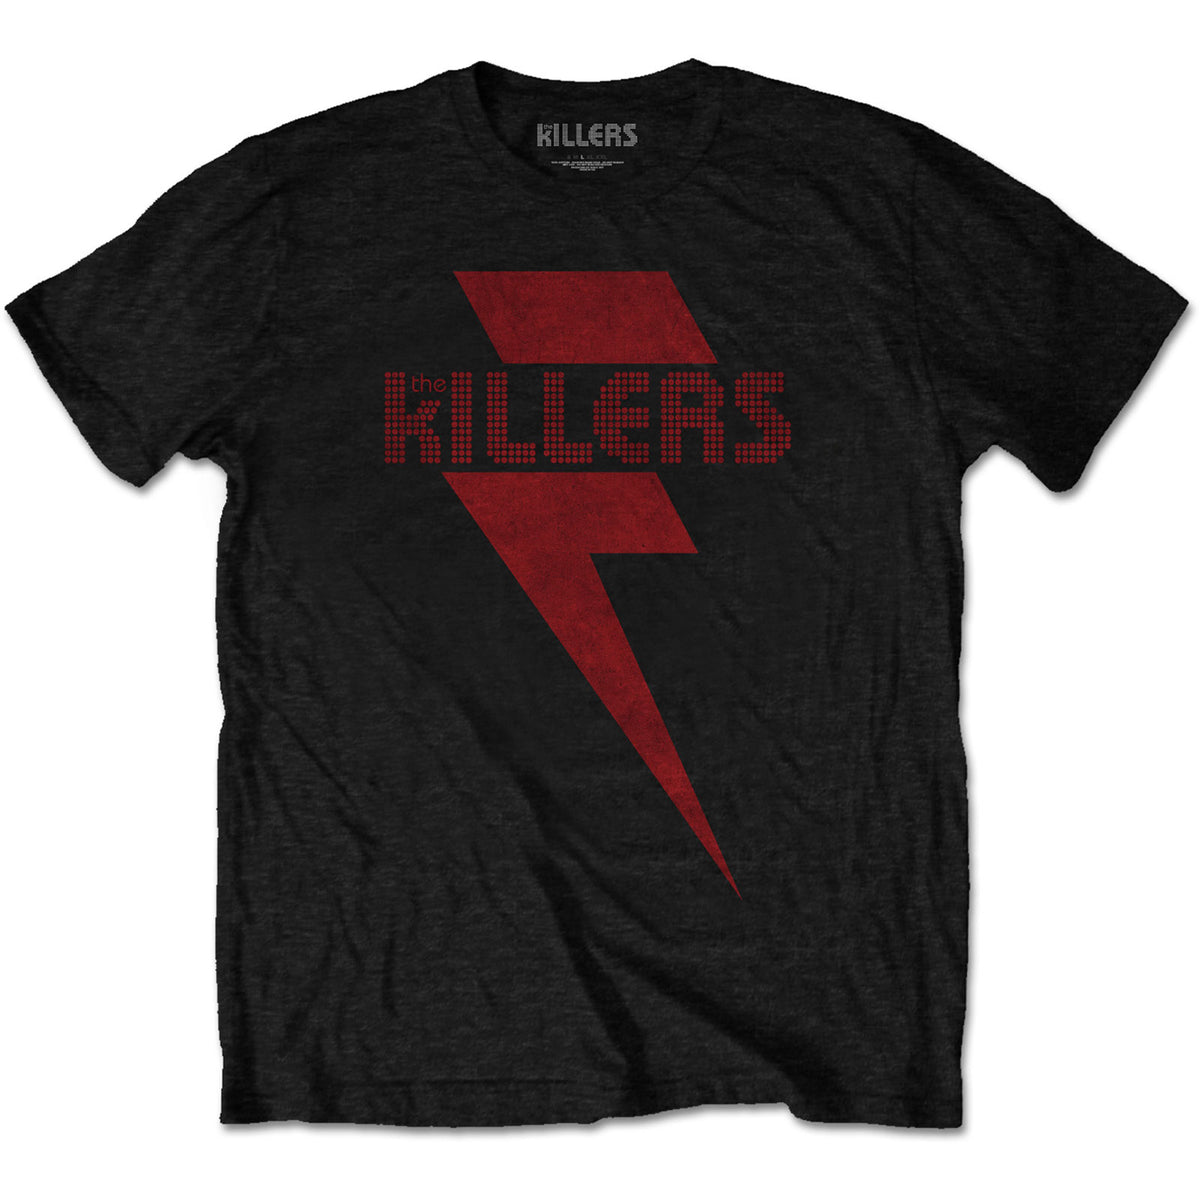 THE KILLERS UNISEX T-SHIRT: RED BOLT - XL